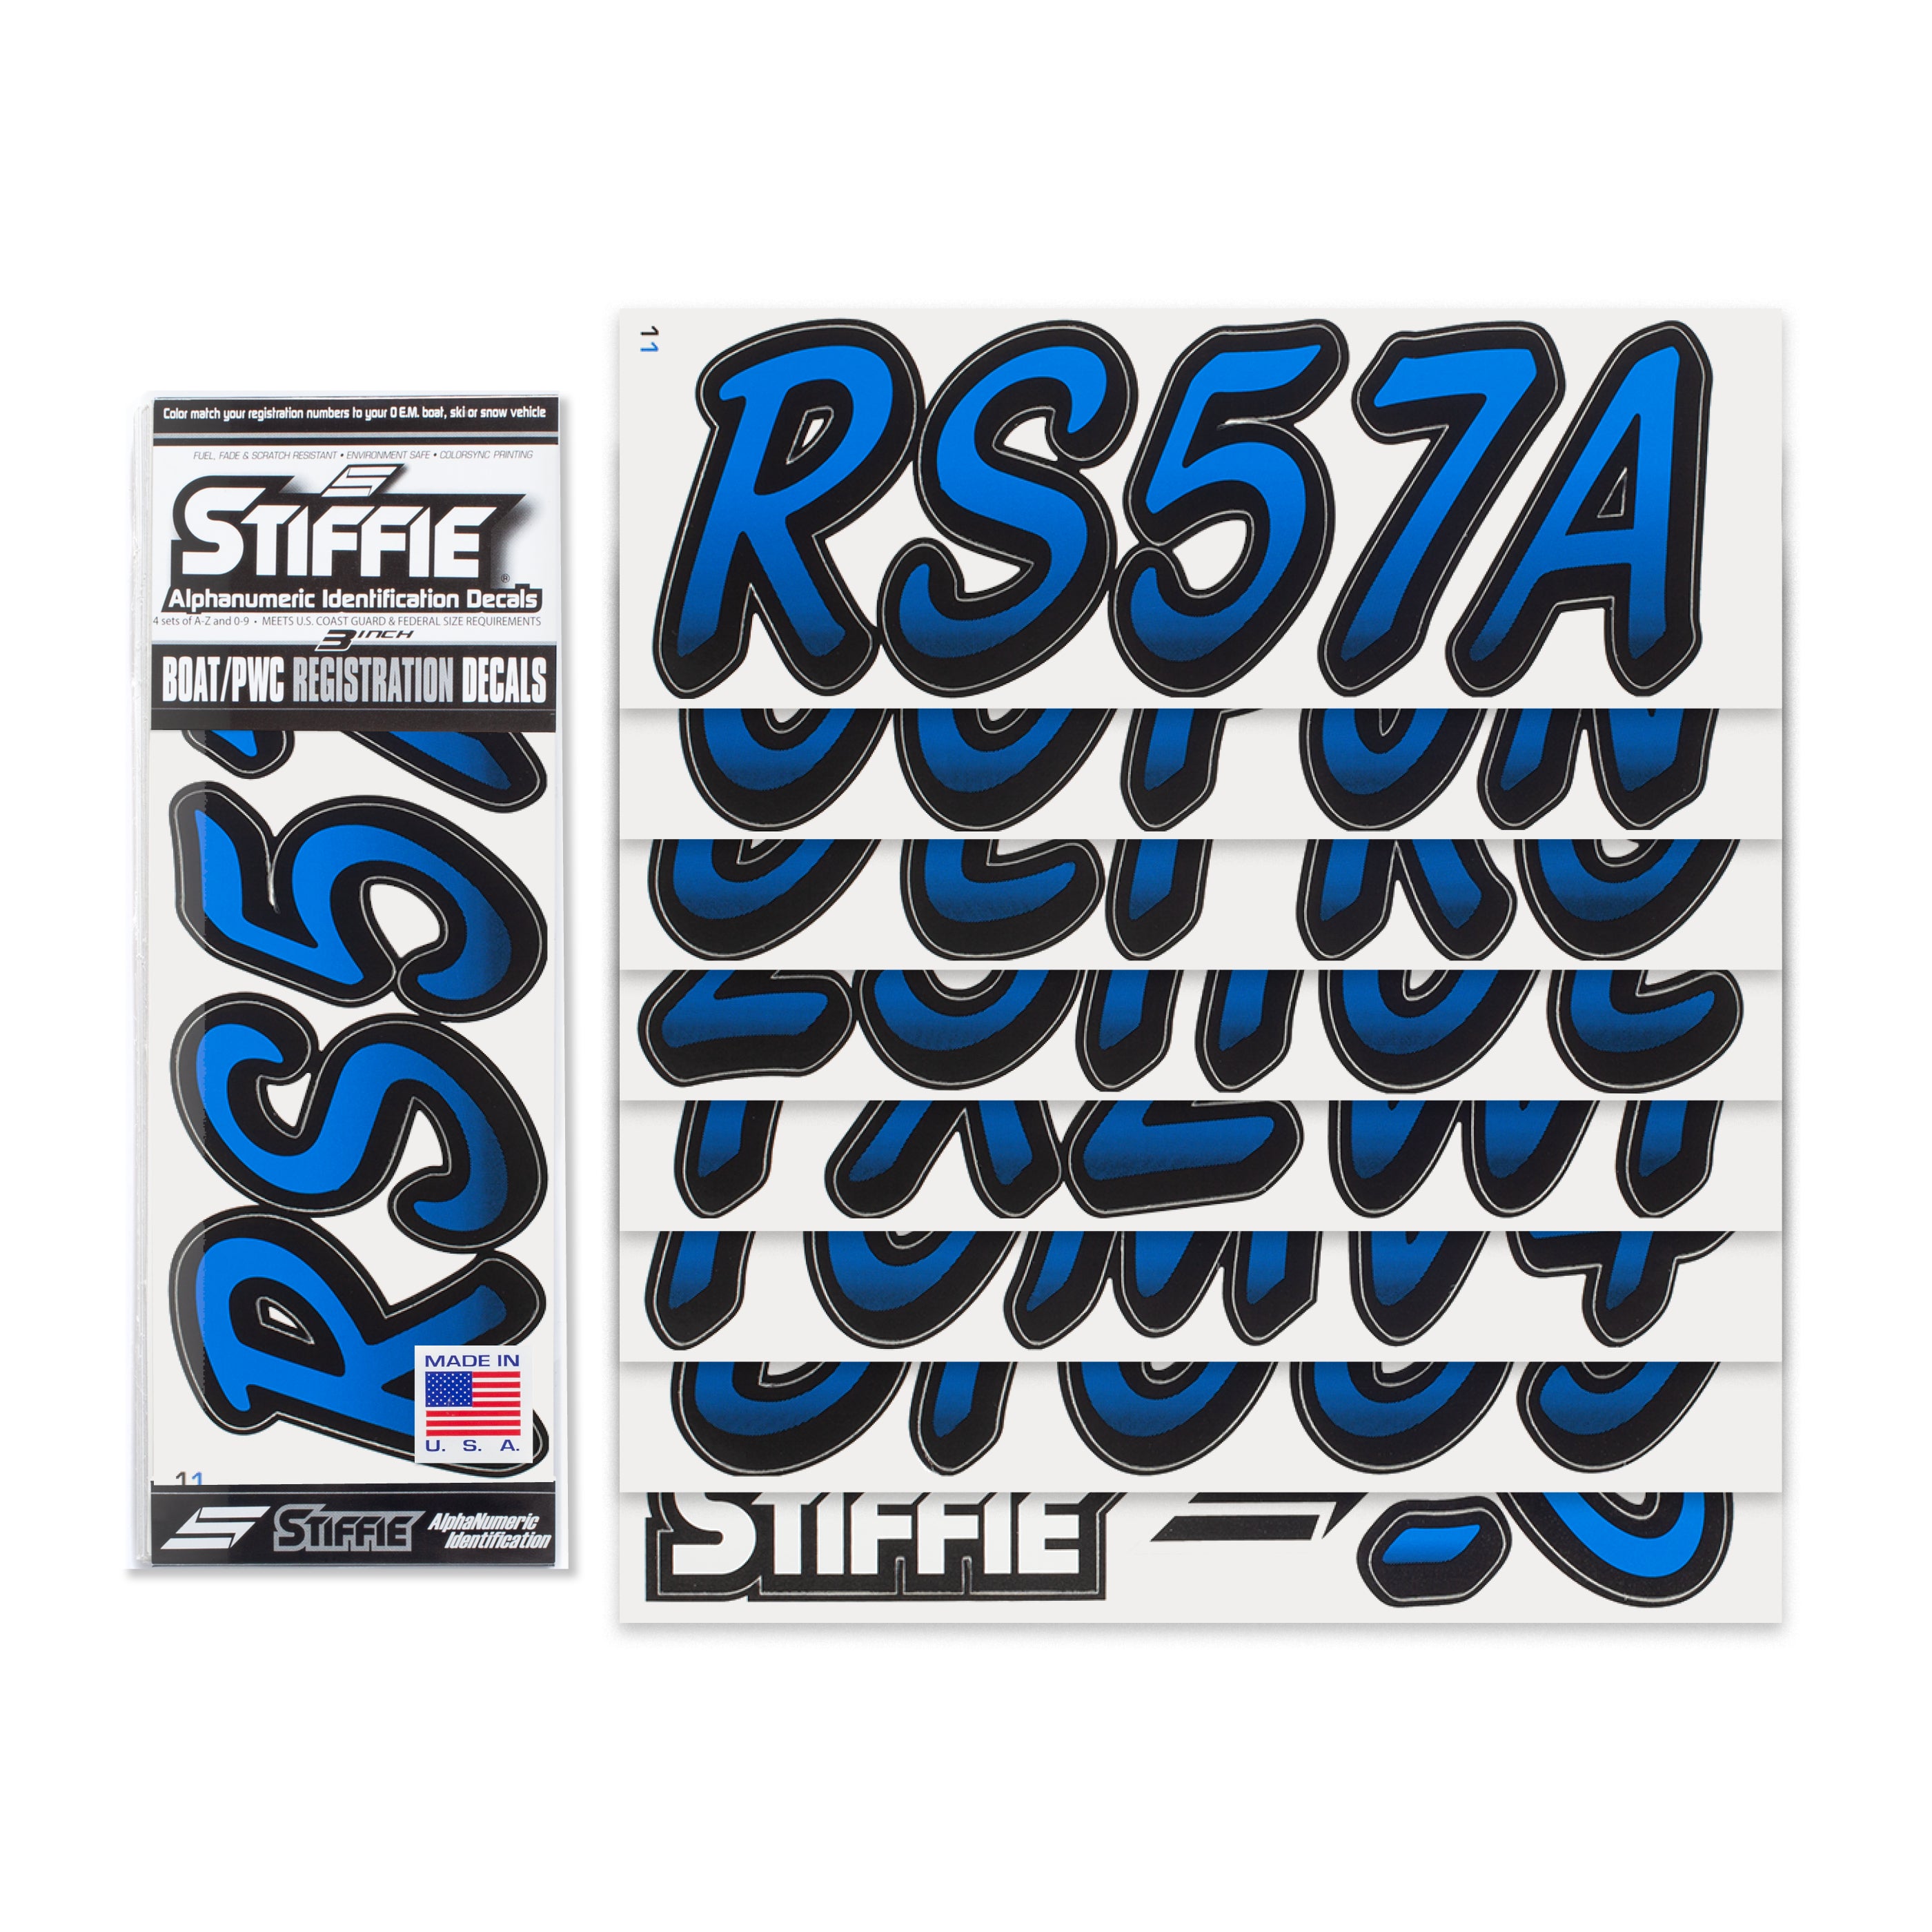 STIFFIE Whipline Octane Blue/Black 3" Alpha-Numeric Registration Identification Numbers Stickers Decals for Boats & Personal Watercraft